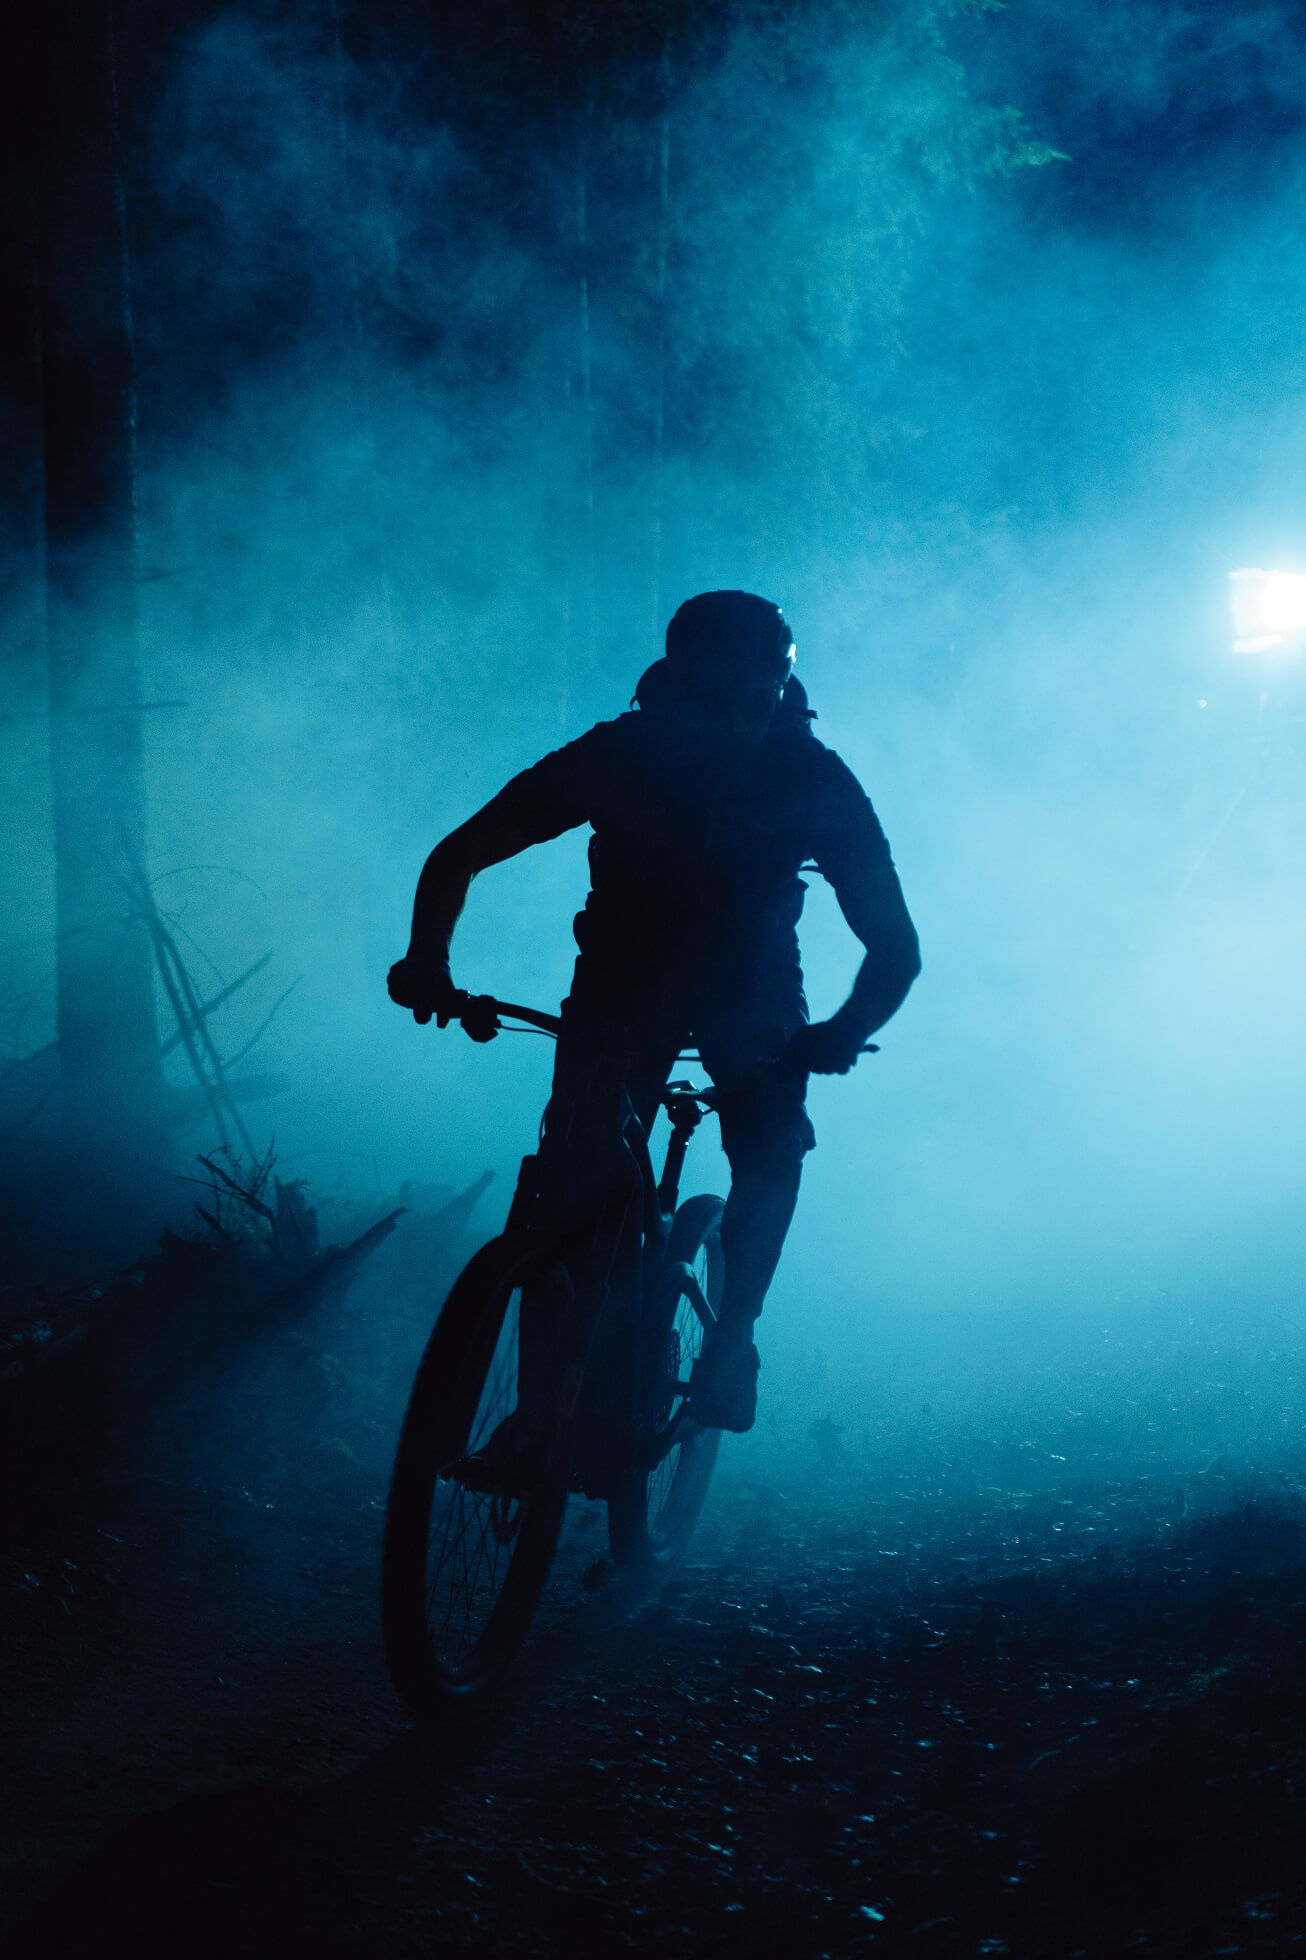 Silhouette of a man riding his mountain bike in a dark forest with blue lights in the background